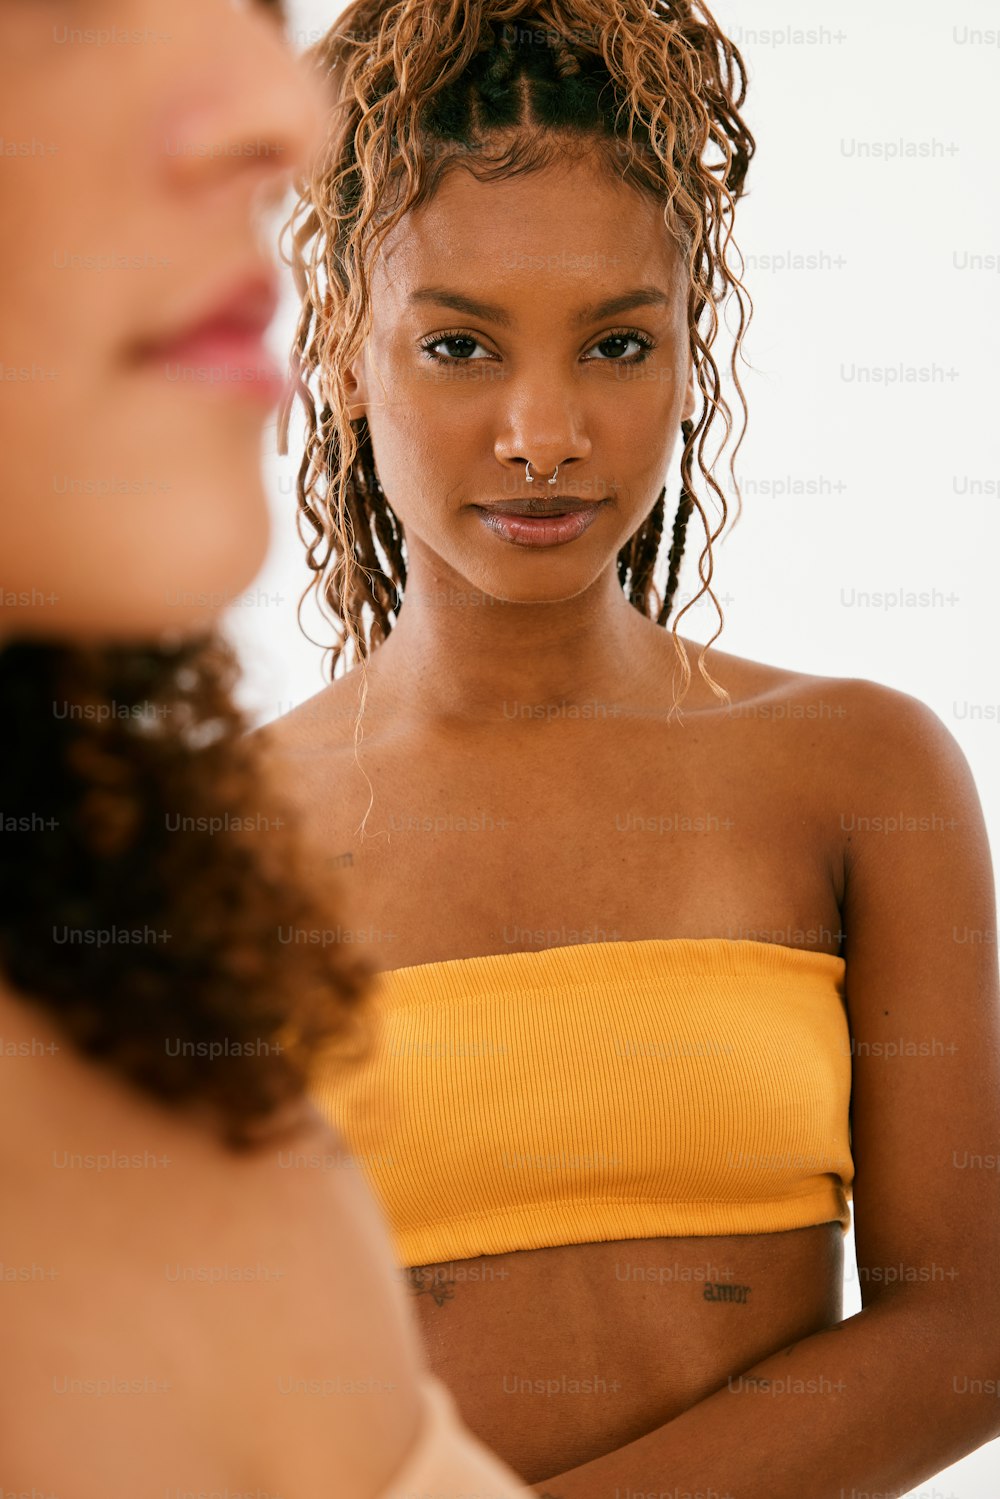 a woman in a yellow top looking in a mirror